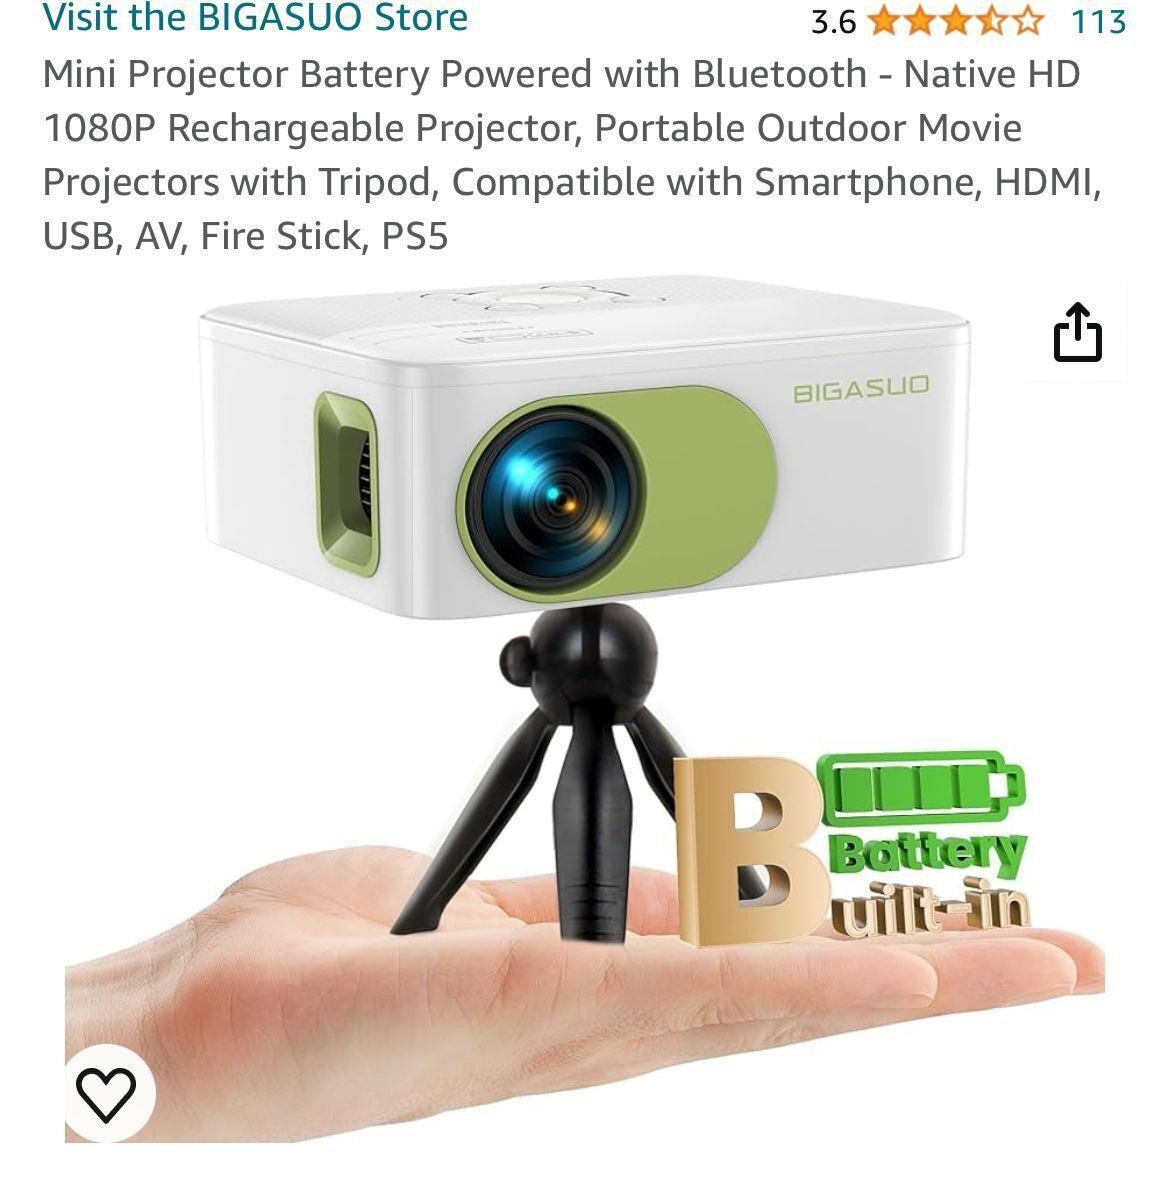 Mini Projector Battery Powered with Bluetooth